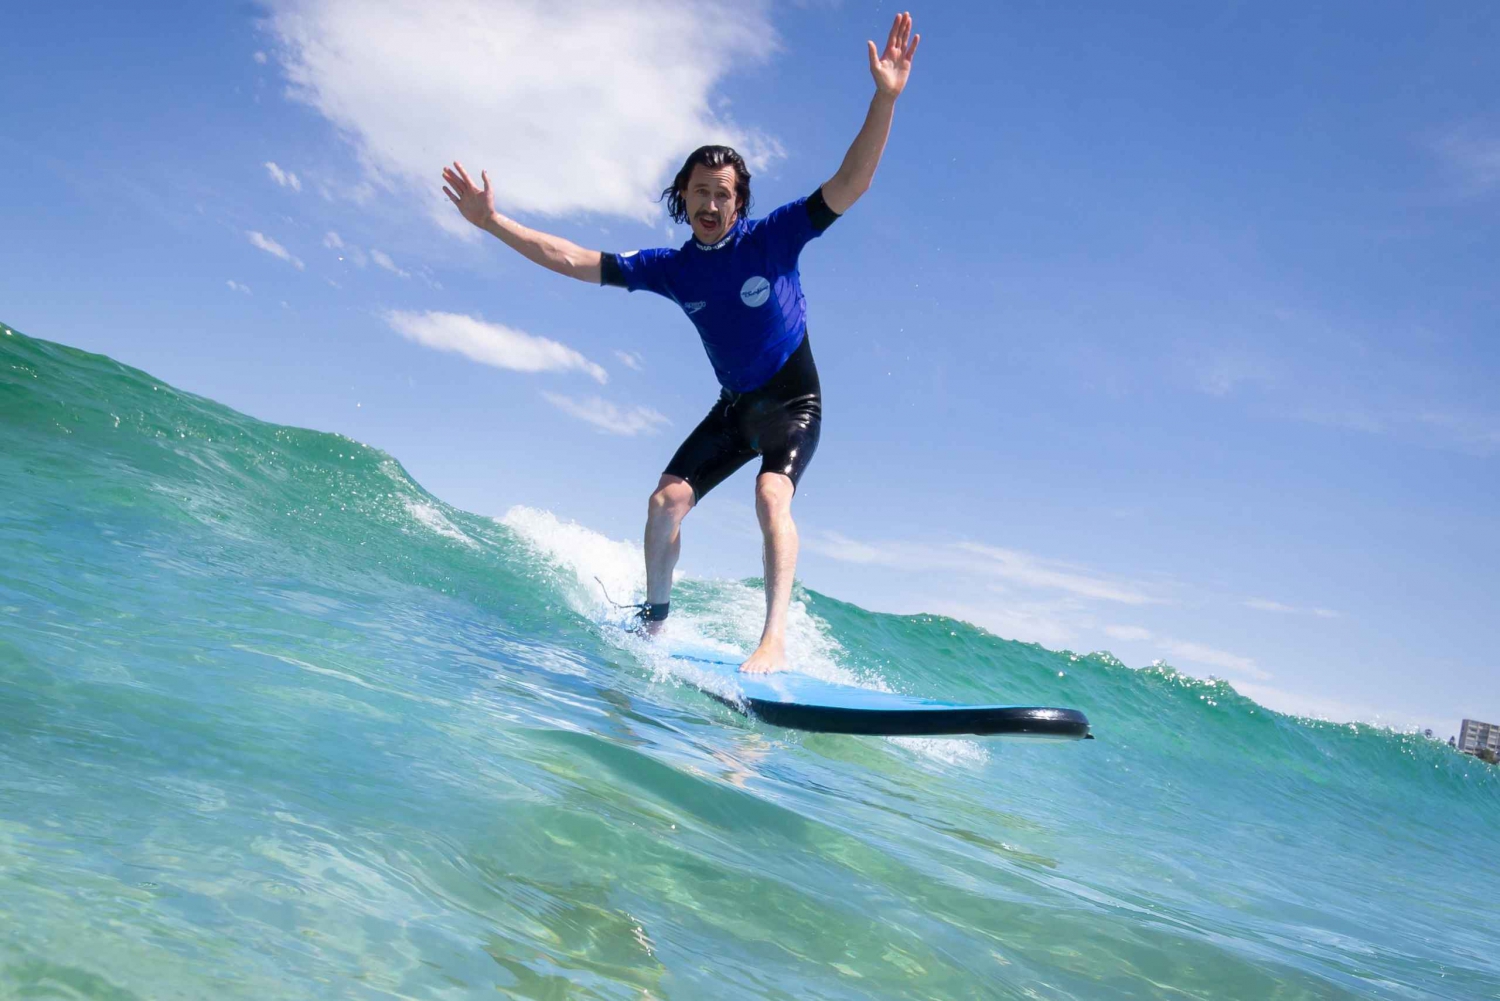 Half Day Learn to Surf Tour From Byron